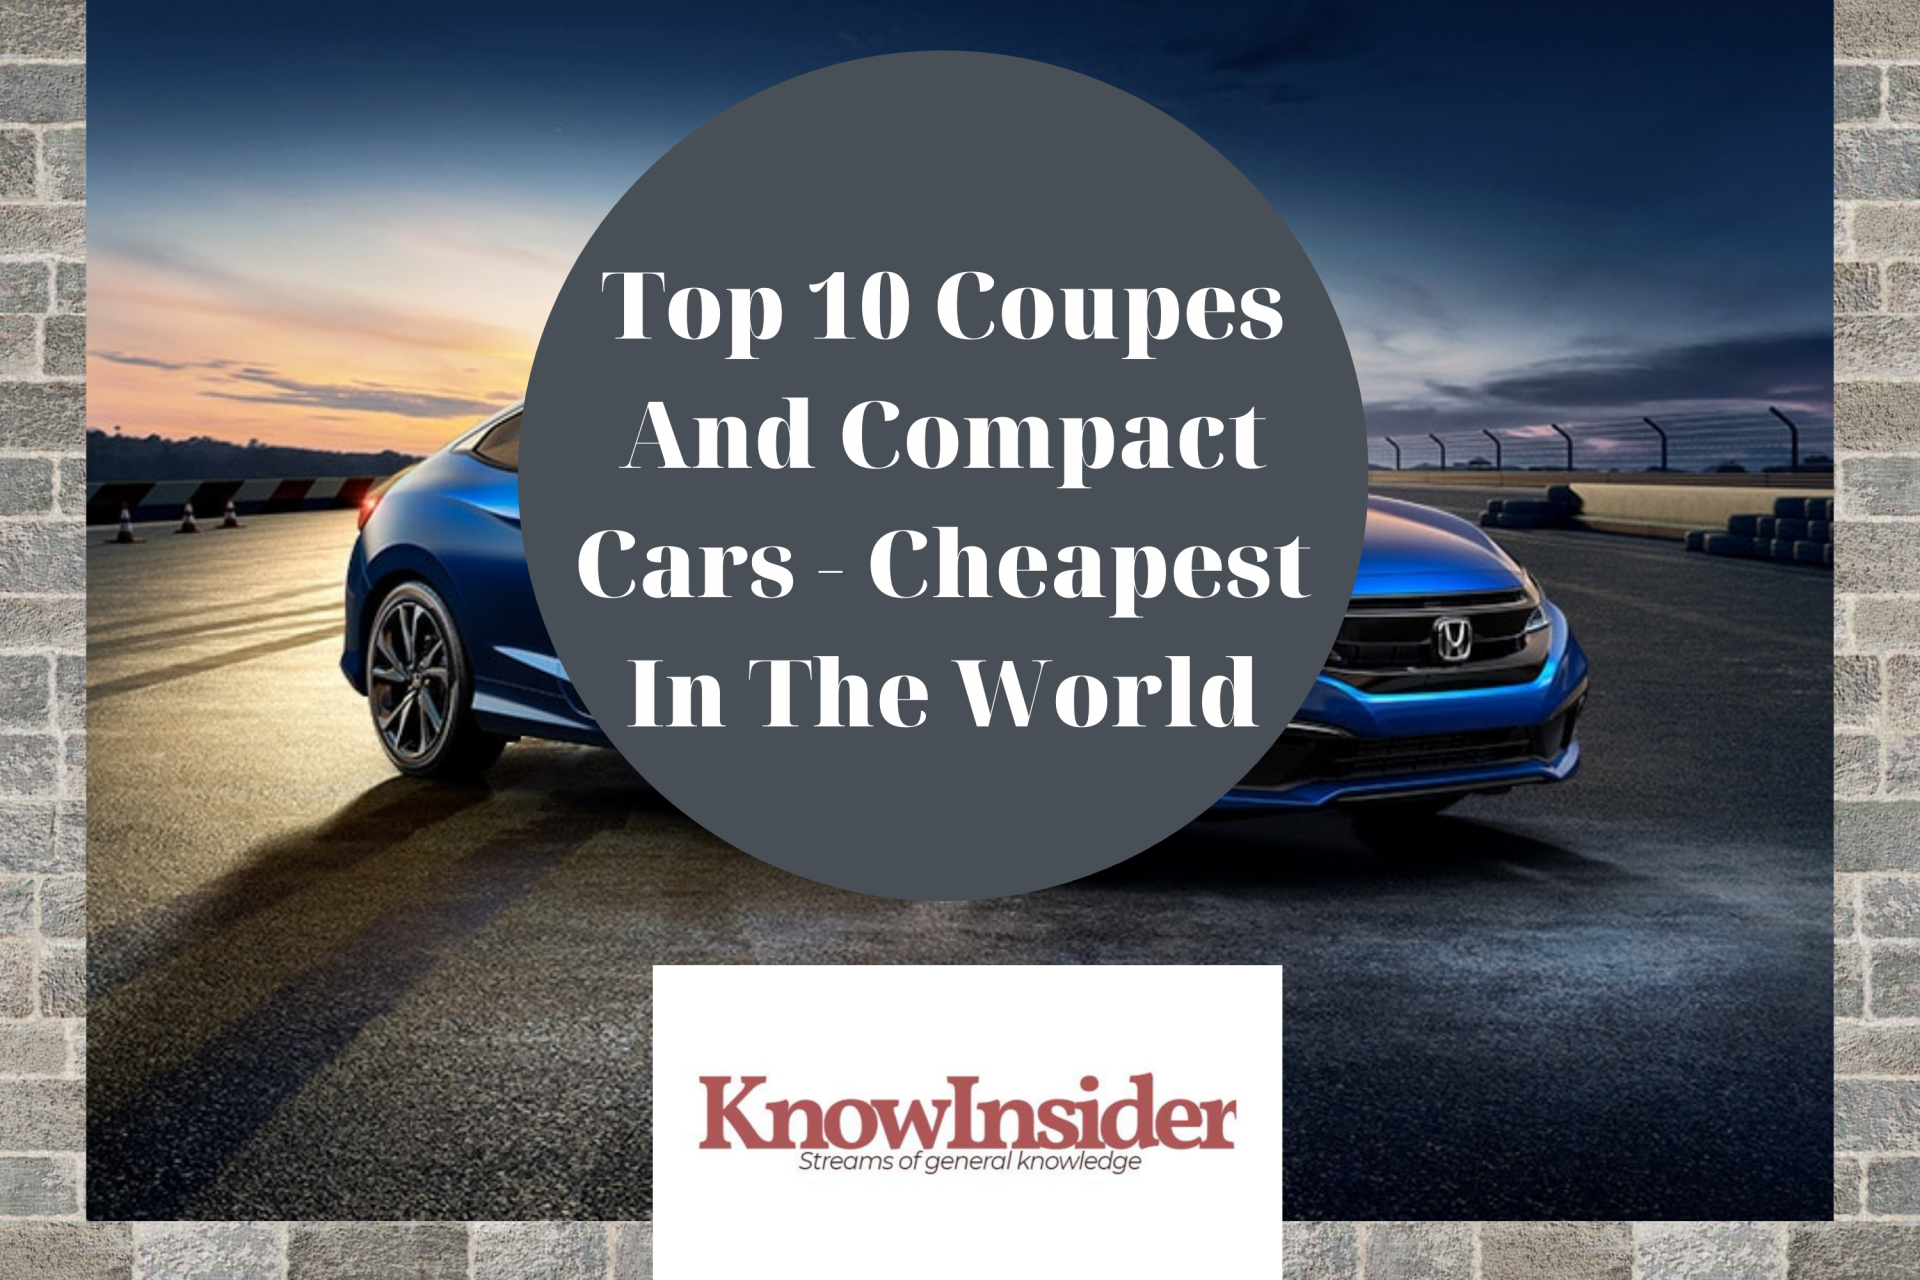 Top 10 Coupes And Compact Cars - Cheapest In The World